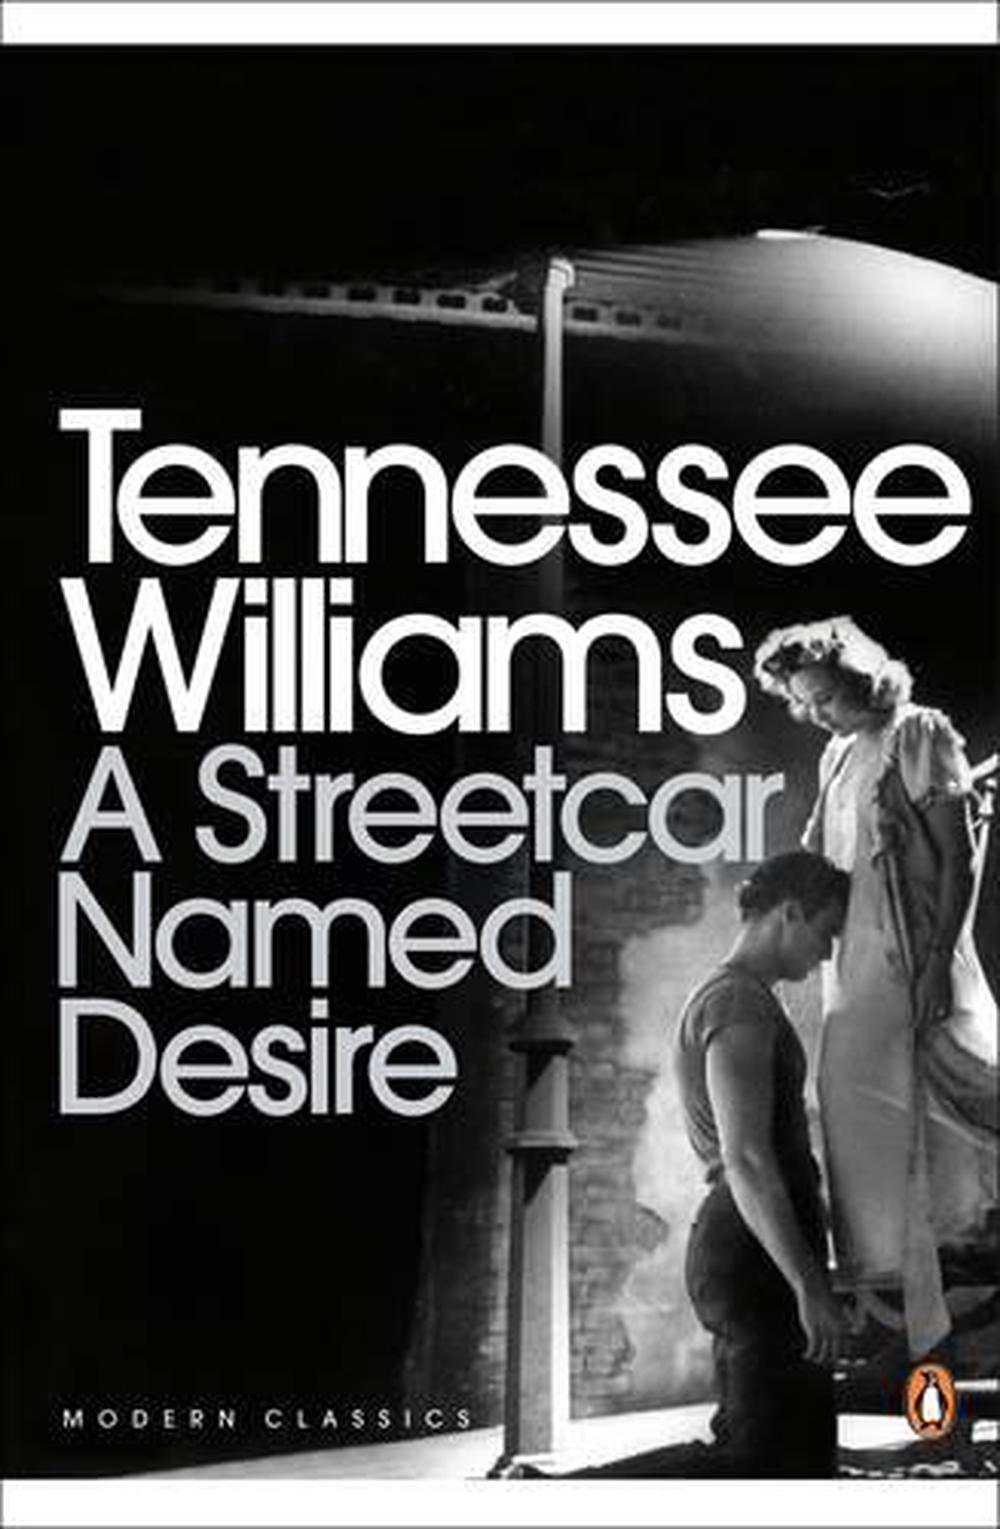 A streetcar named Desire (Dramatists Play Service Inc.)